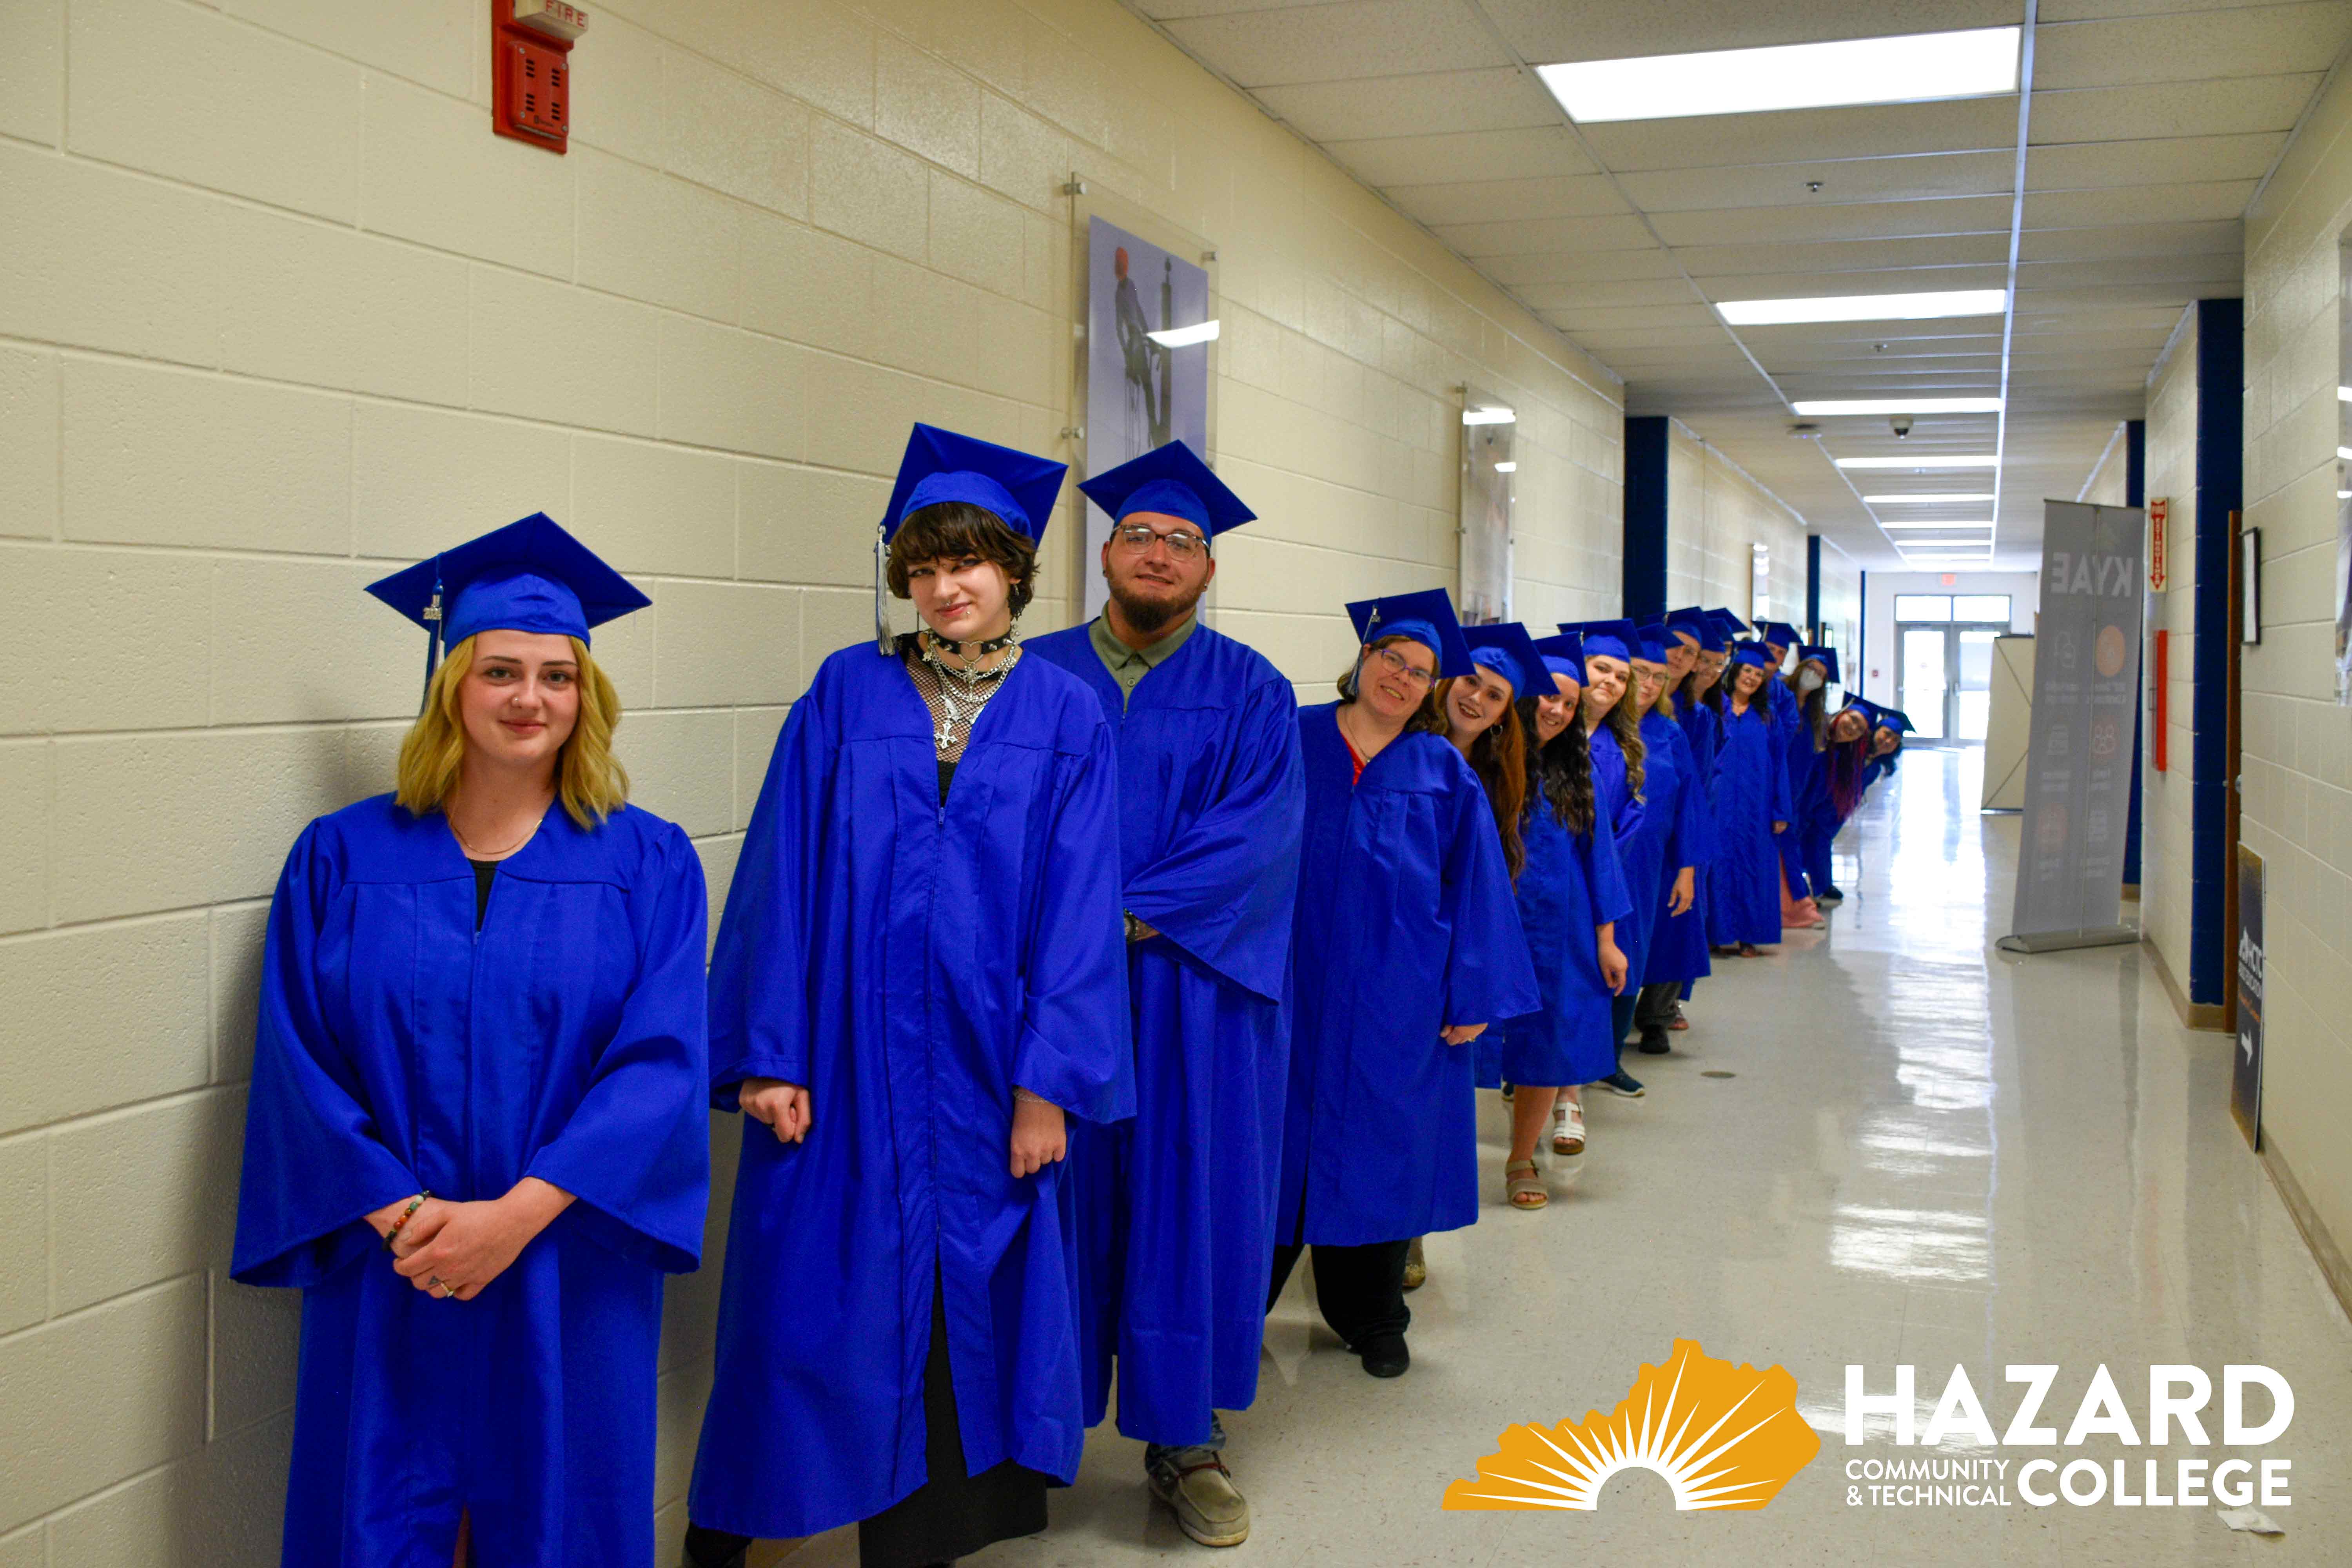 Hazard Community & Technical College (HCTC) held its adult education graduation program on June 27 at its Technical Campus. Students from across the program’s service area of Breathitt, Knott, Lee, Leslie, Owsley and Perry attended the event. 